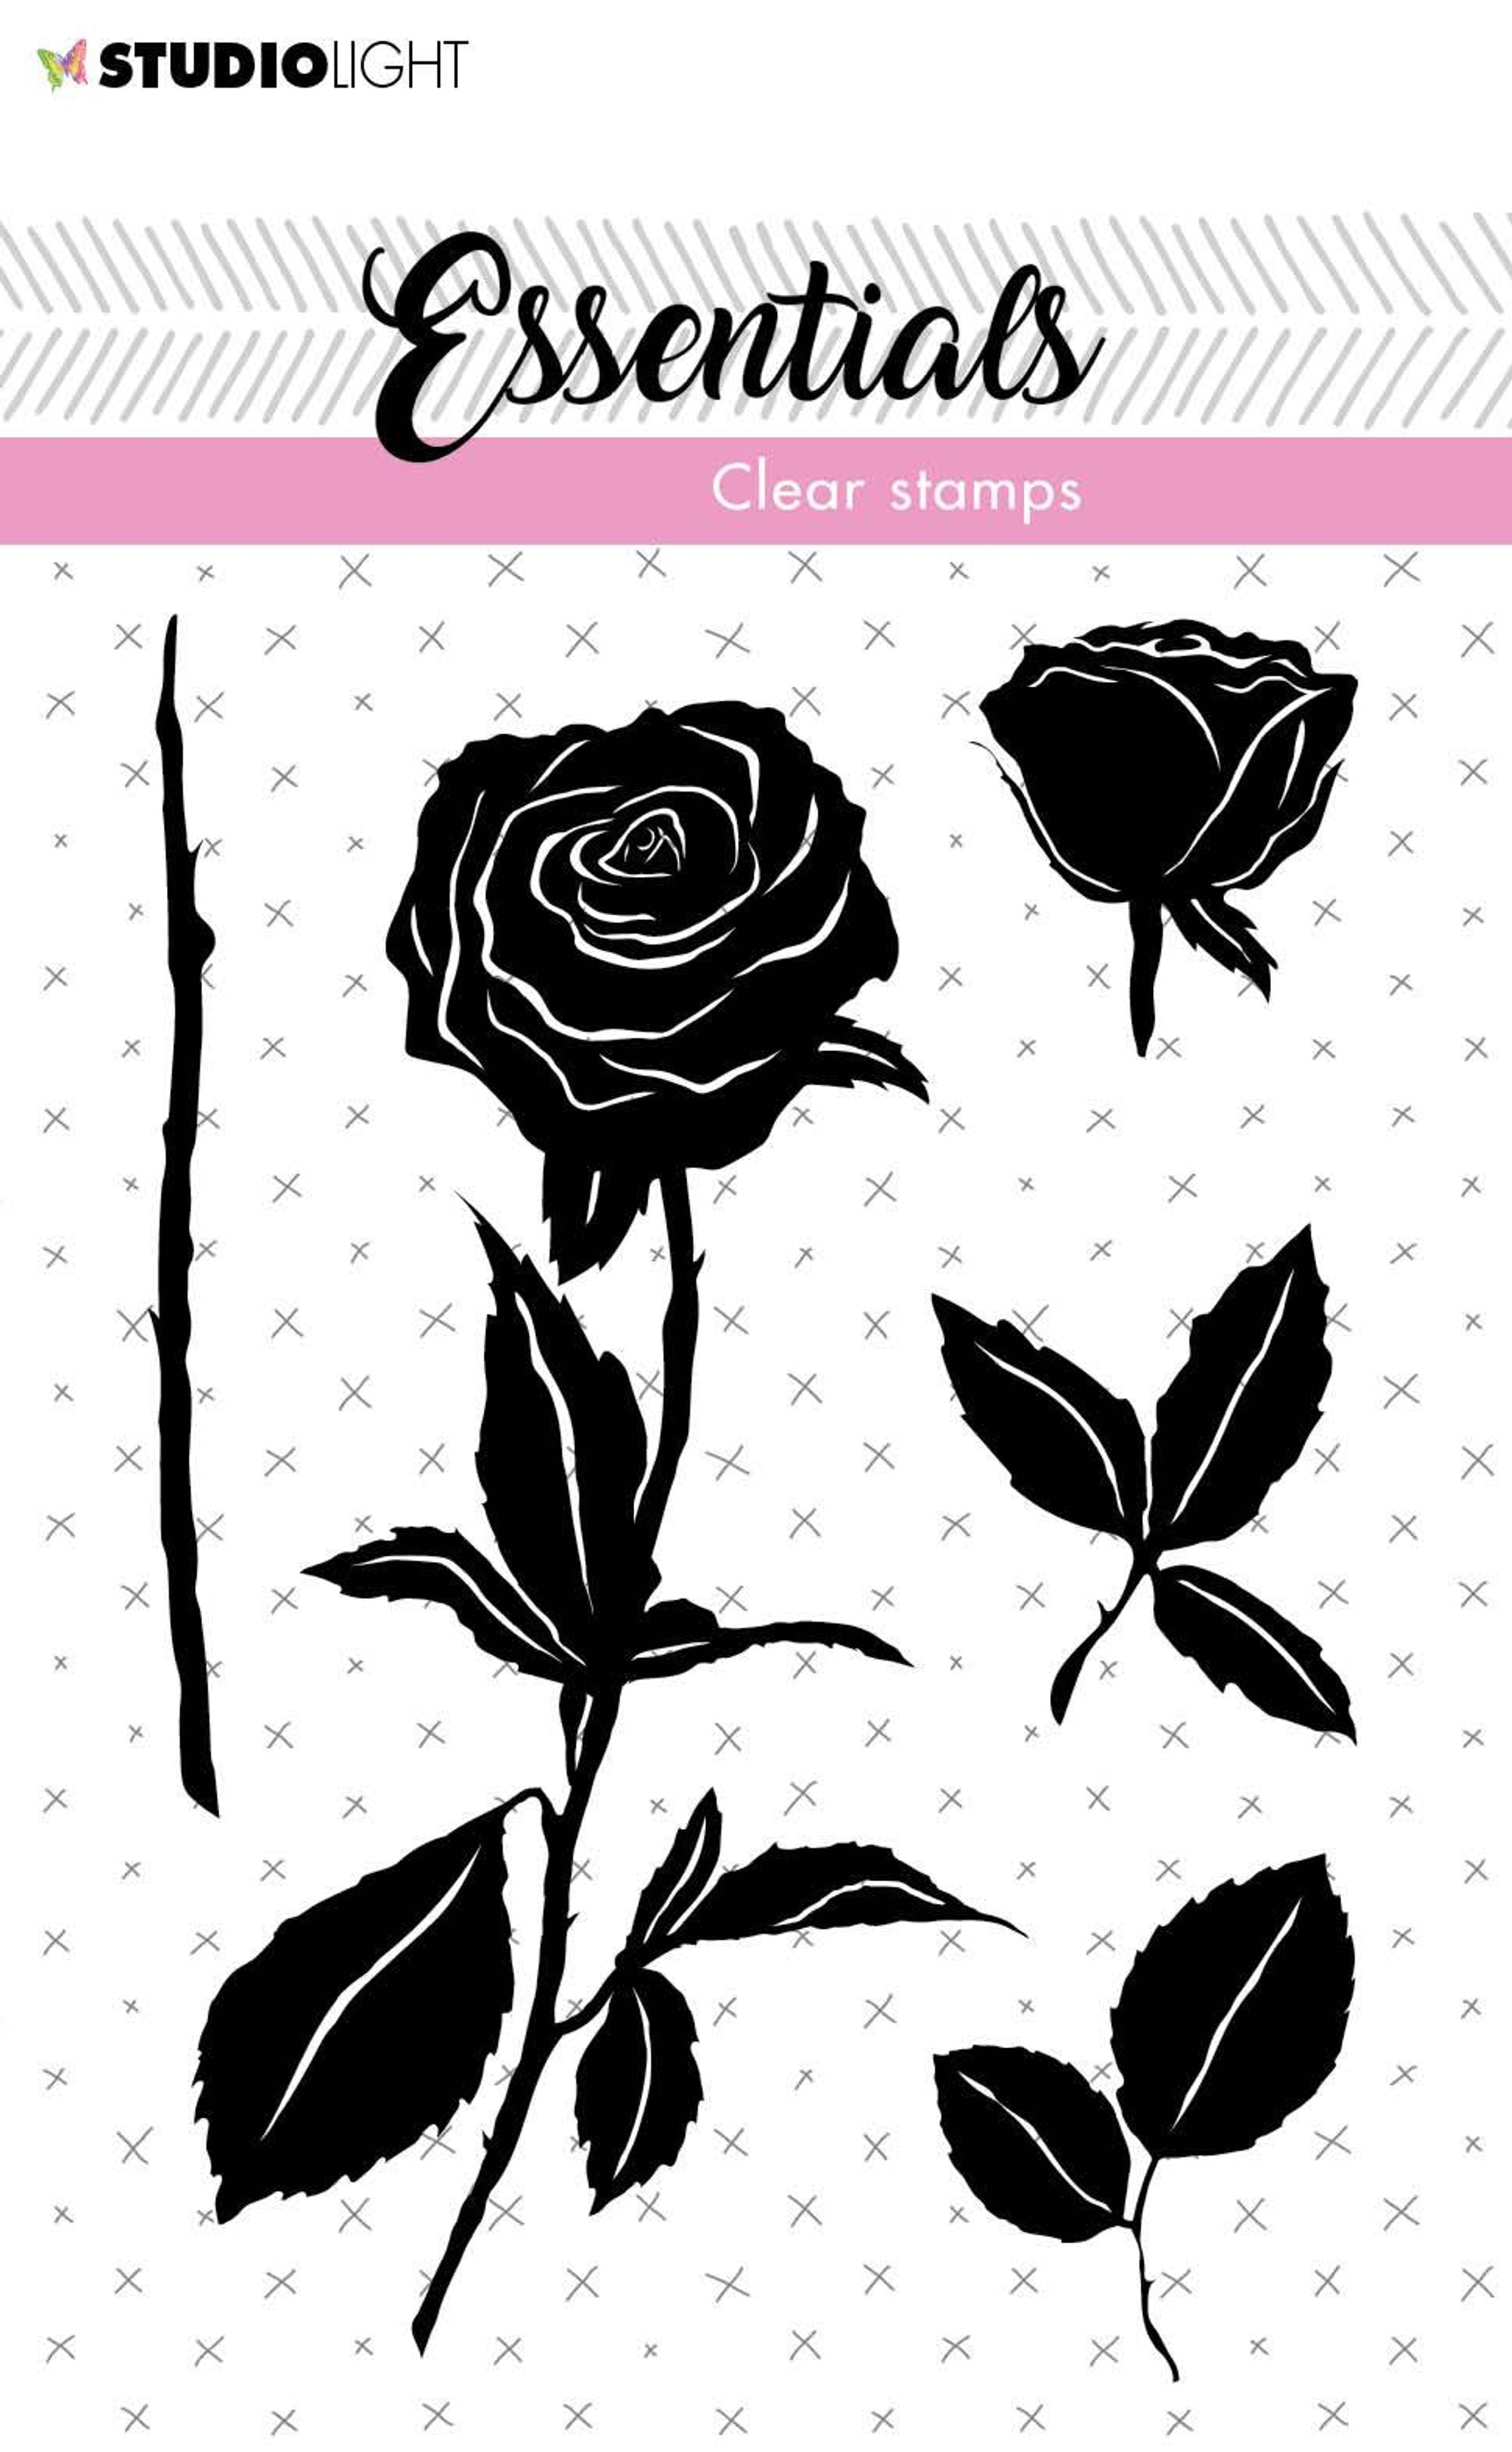 SL Clear Stamp Roses Essentials 73x102,5mm nr.28